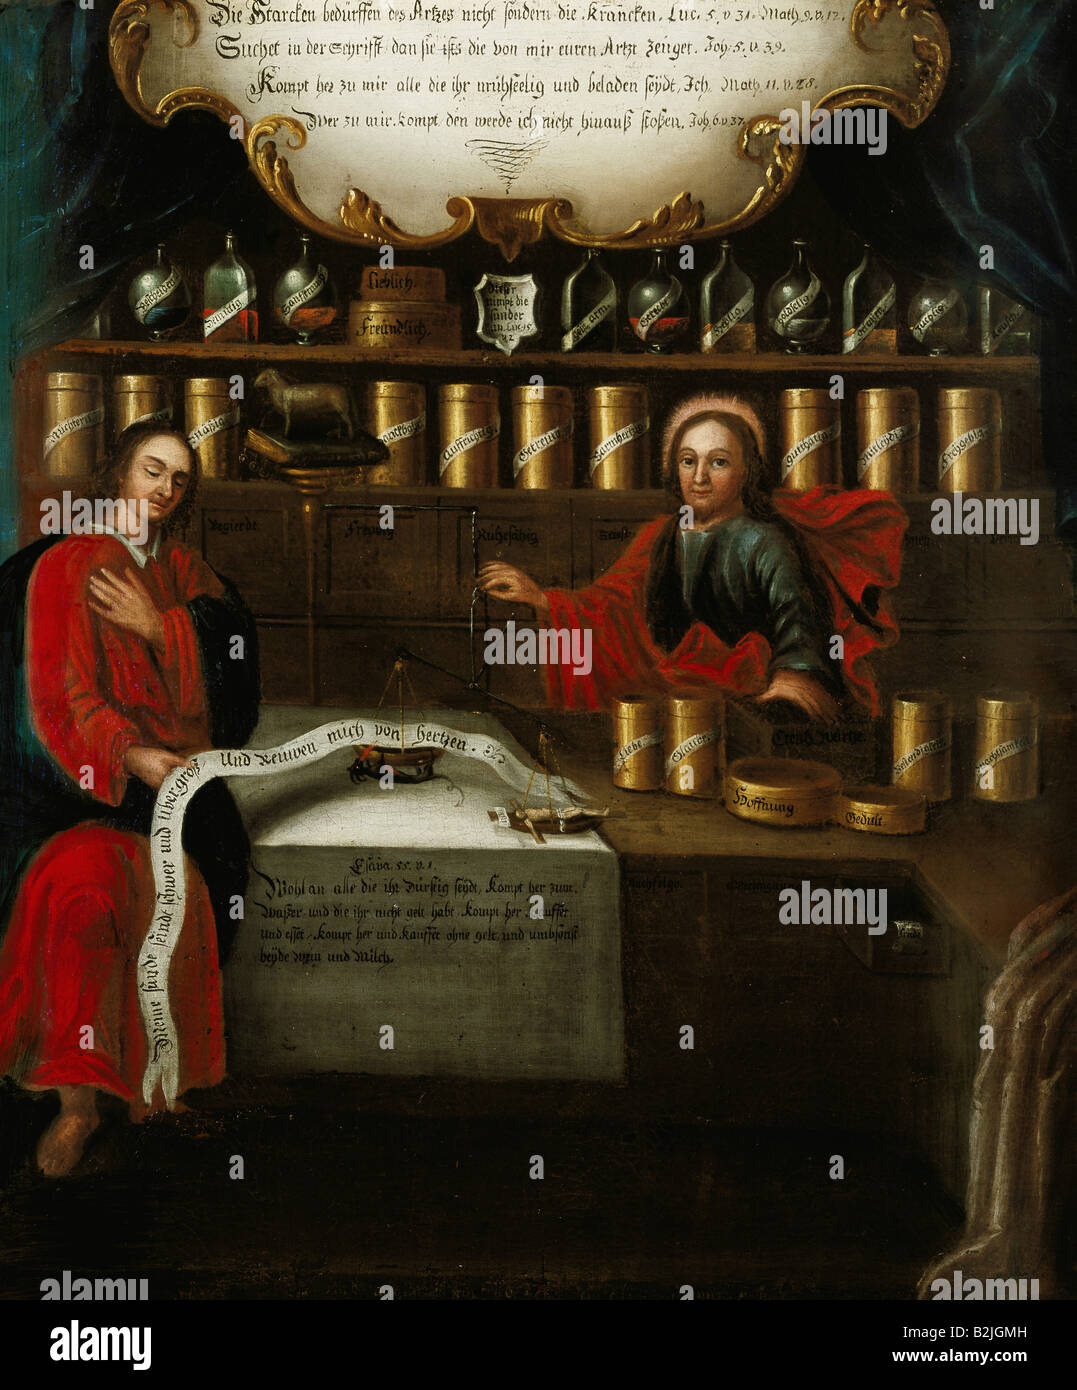 religion, Christianity, prayer, Christ as pharmacist, painting, oil on wood, 67 cm x 56 cm, Southern Germany, 18th century, Bavarian National Museum, Munich, edification, medicine, fine arts, salvation, pharmacy, vessels, bottles, Jesus, holding scales, scale, historic, historical, Christendom, people, Stock Photo